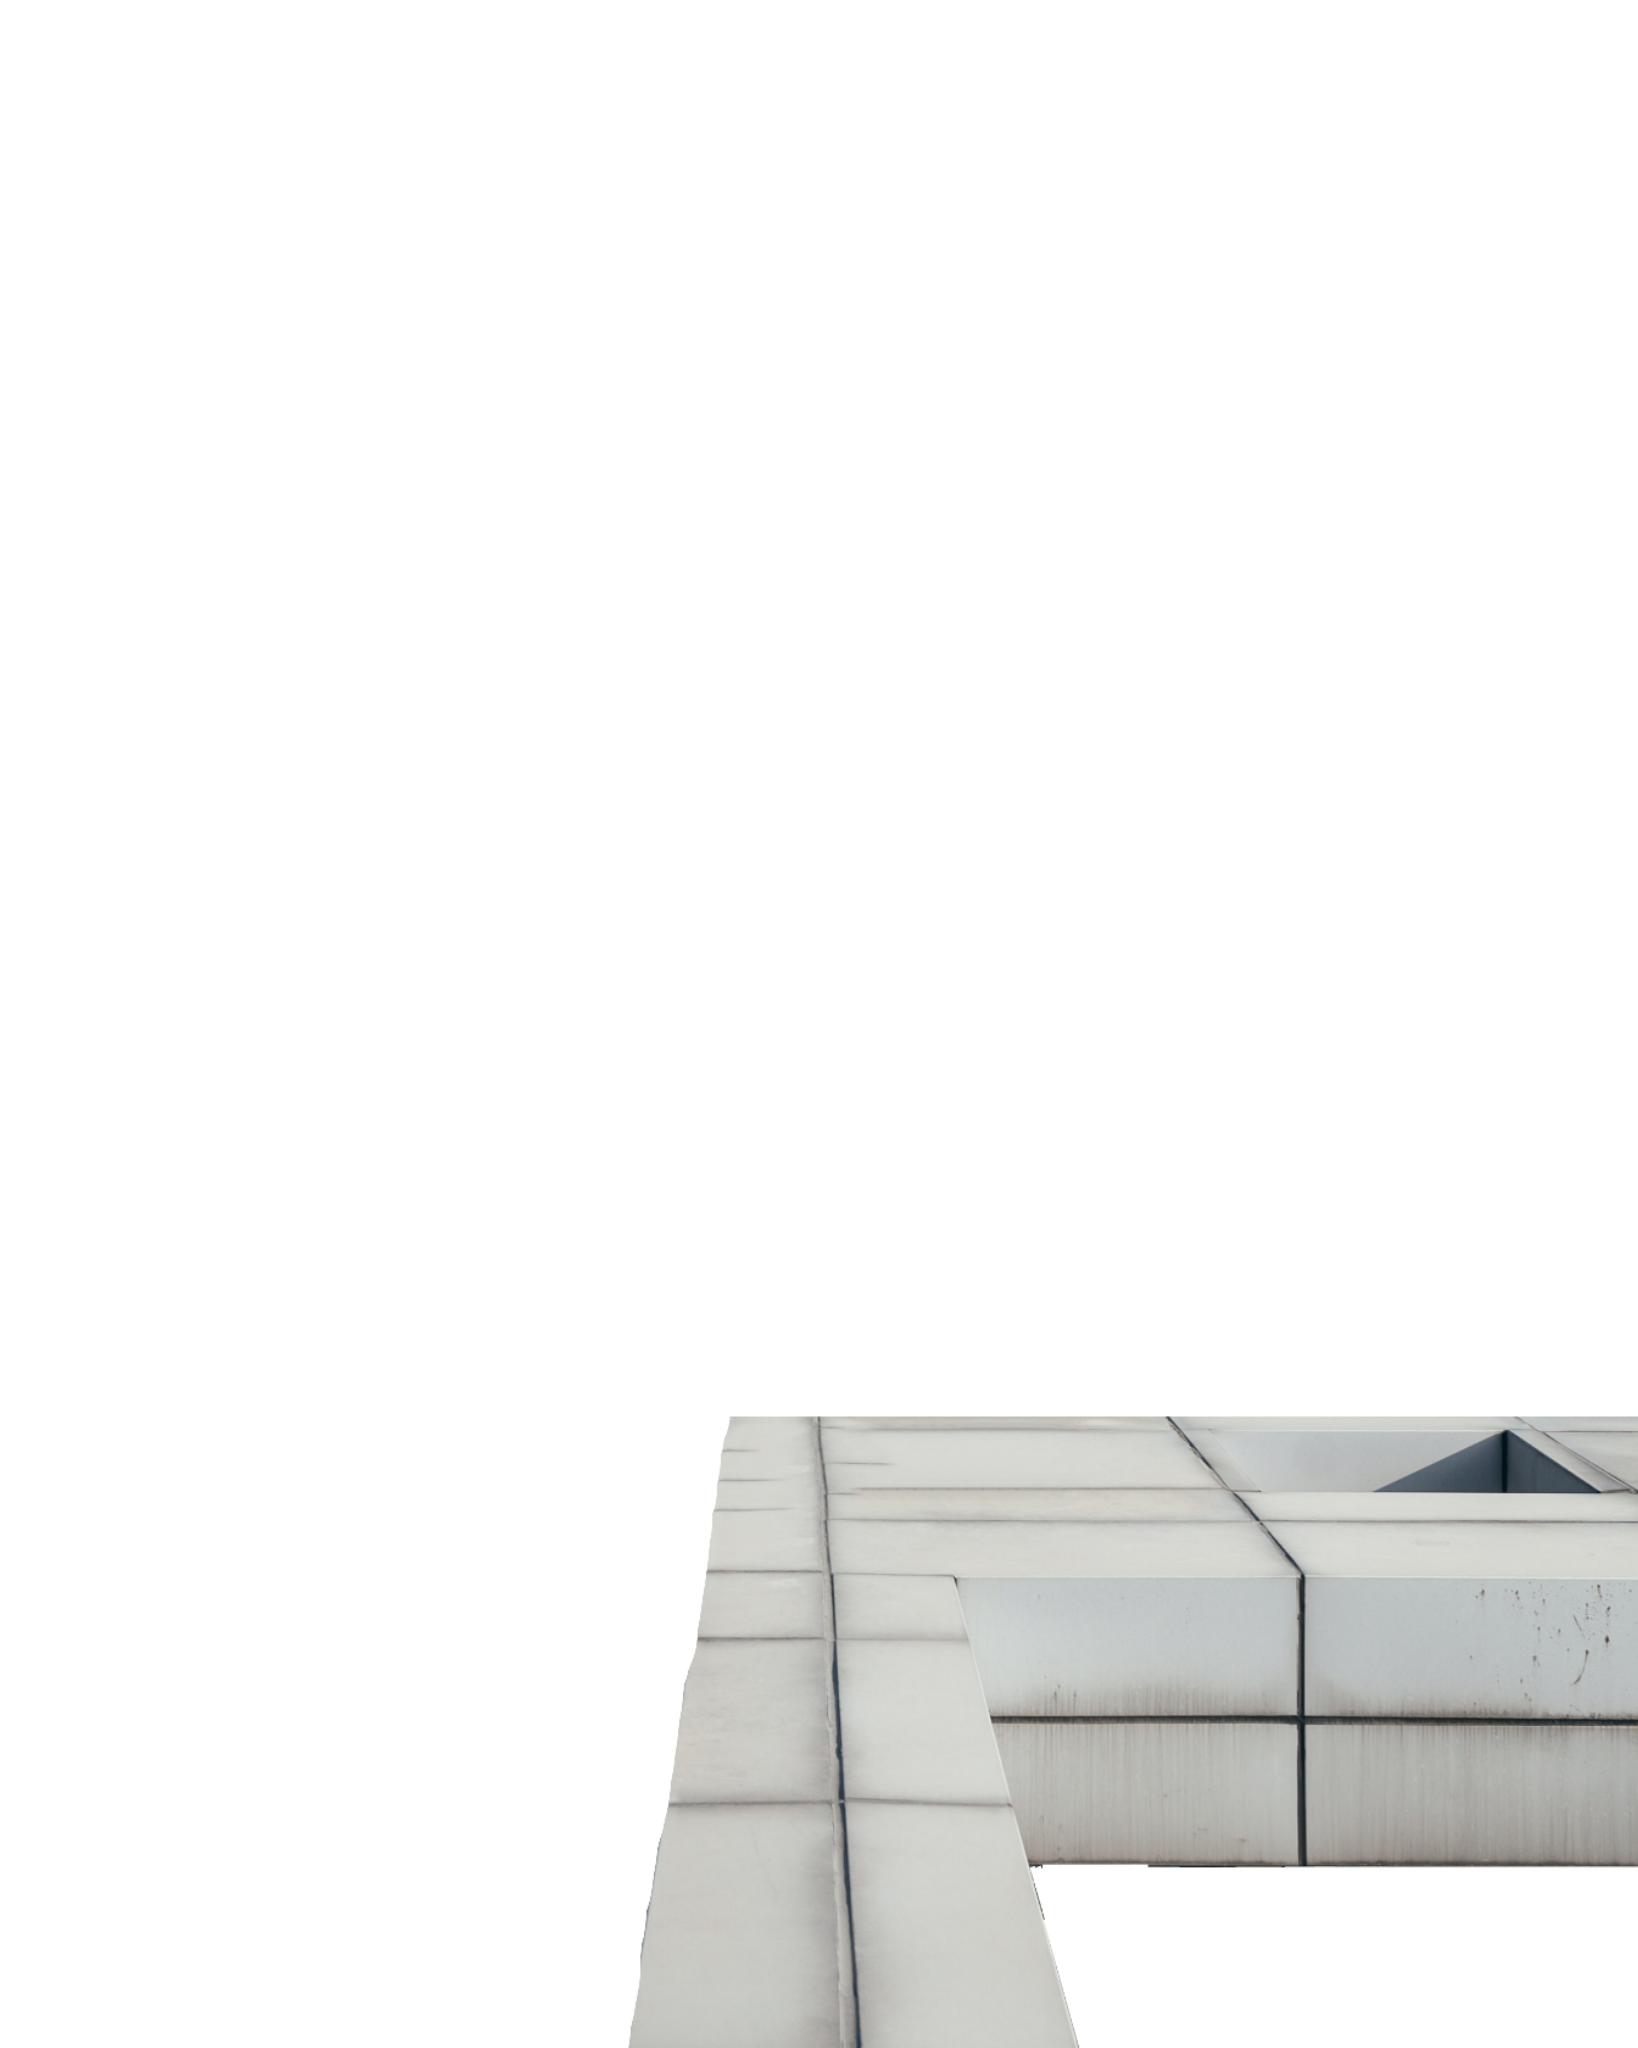 Rooftop editing background